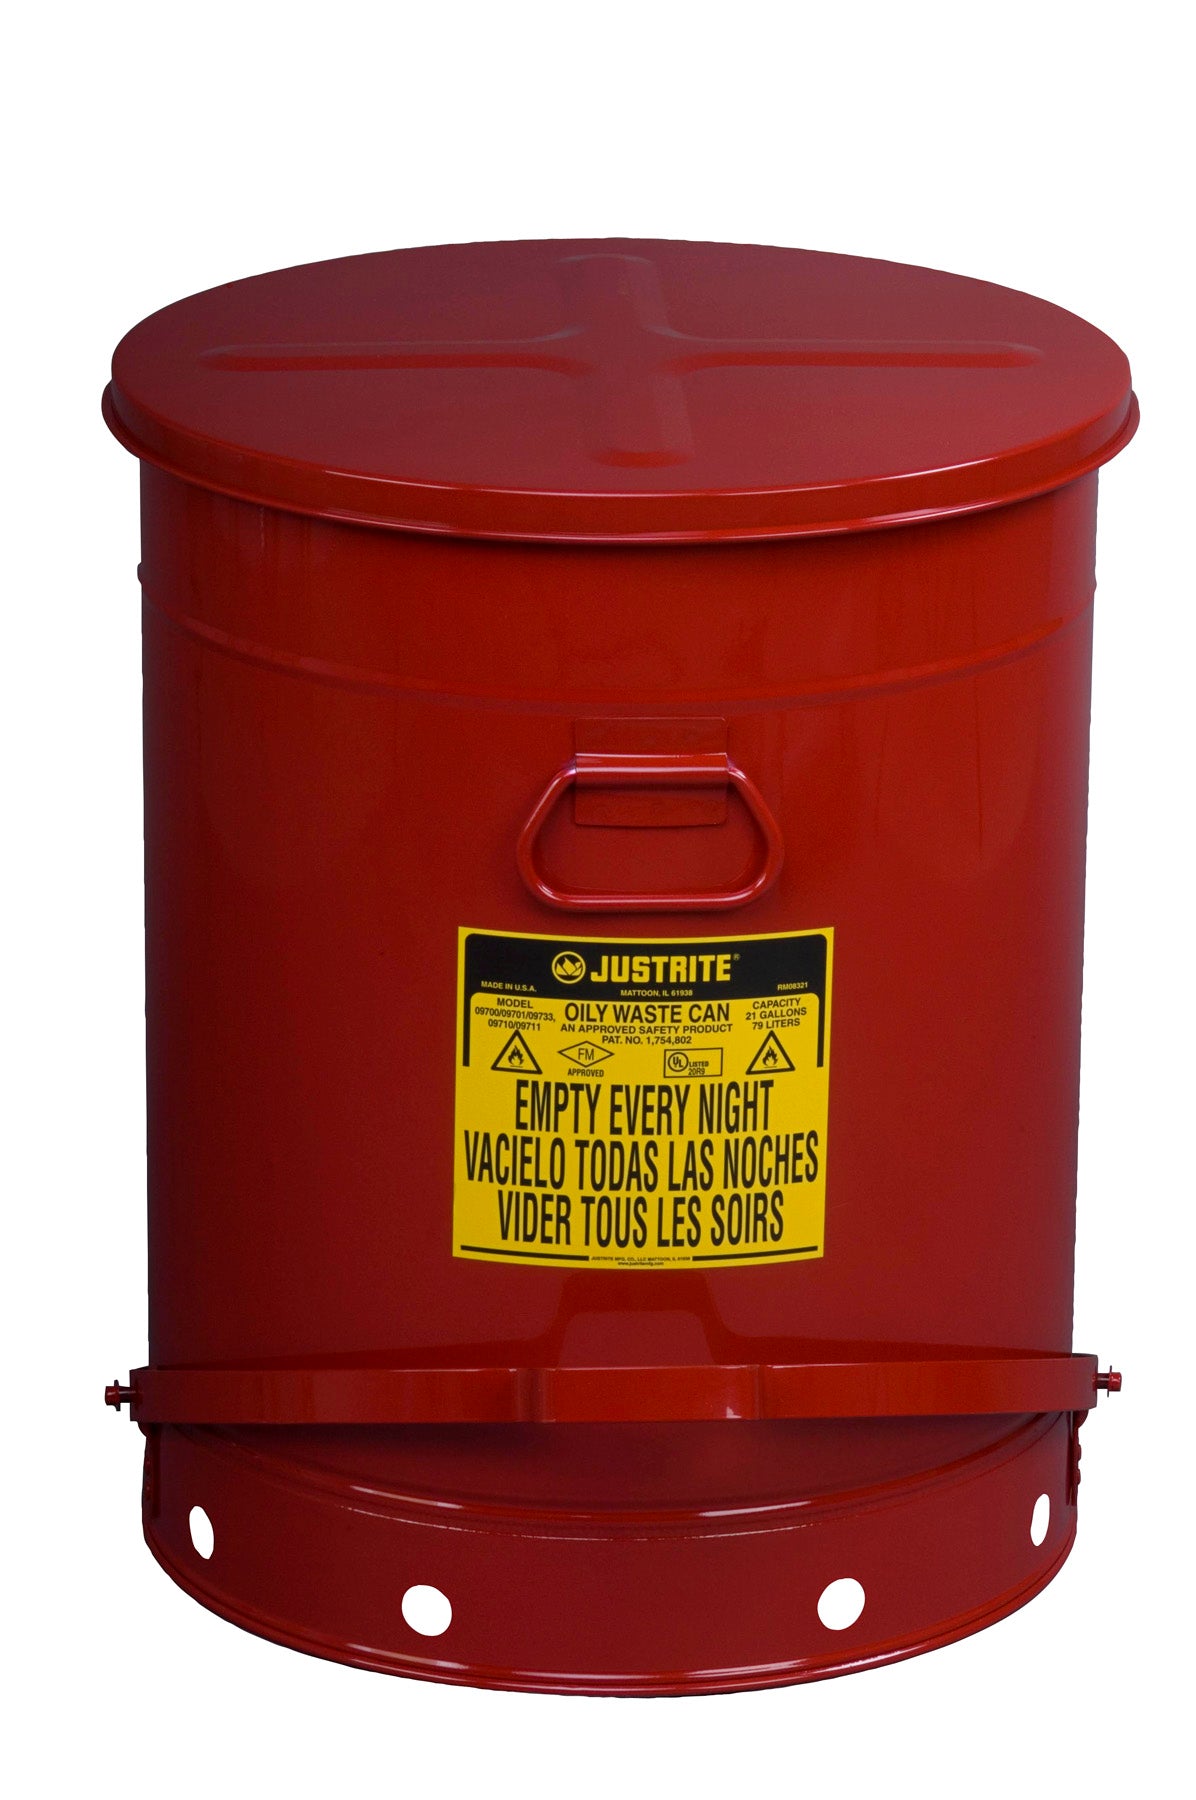 Justrite 21-Gallon Metal Oily Waste Can w/ Foot Operated Cover